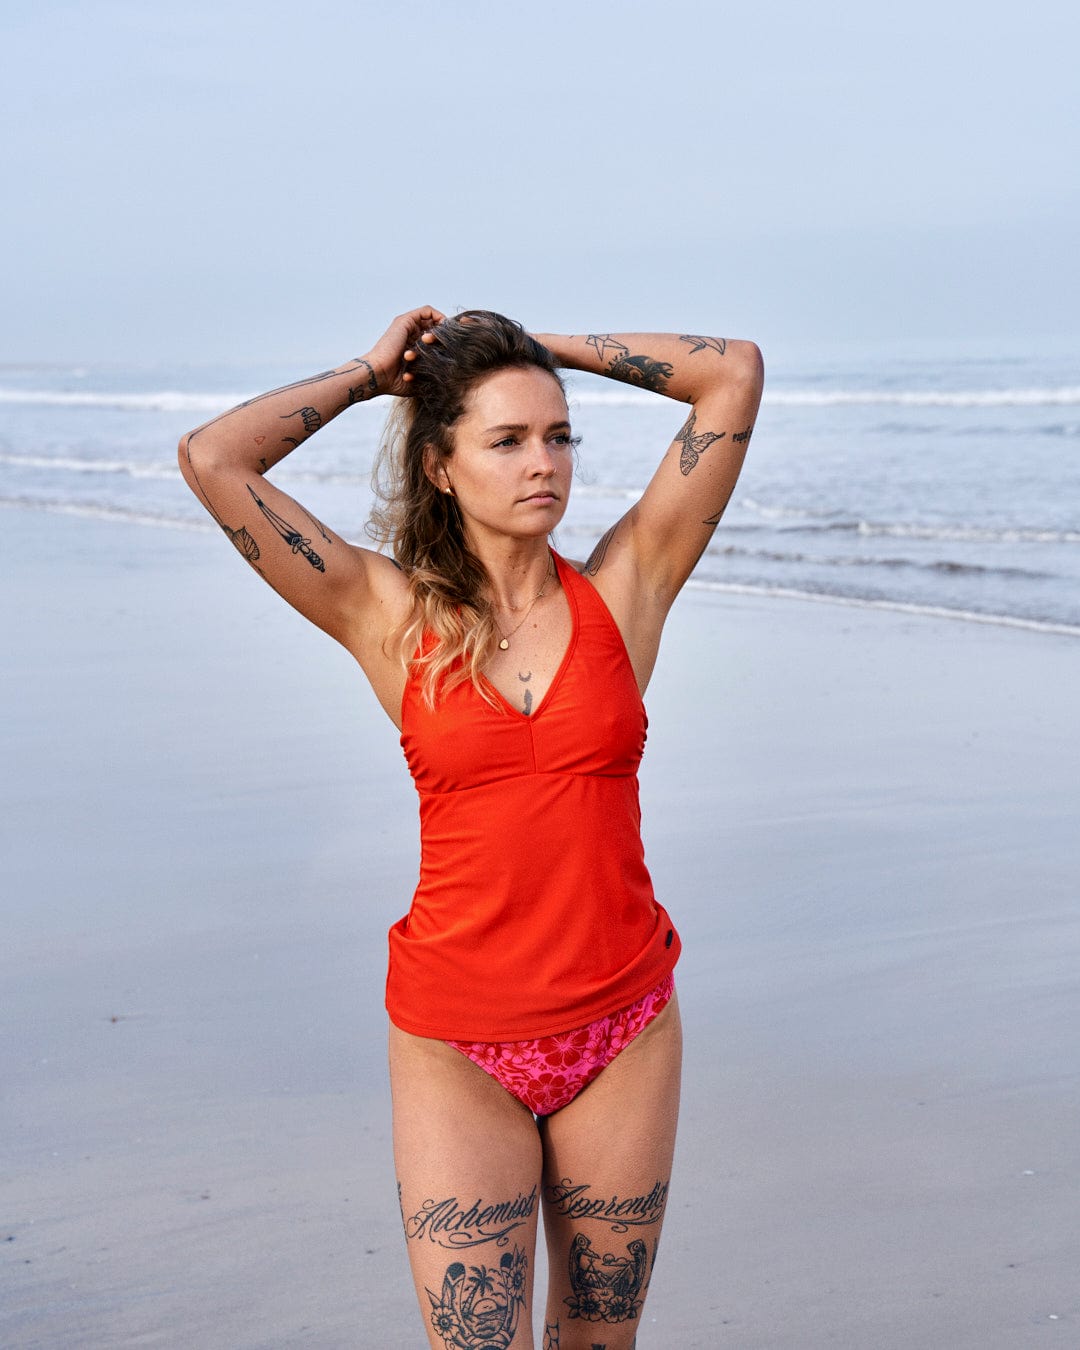 A woman with tattoos stands on a beach in a Carly Hibiscus - Recycled Womens Halter Neck Bikini Top in pink by Saltrock, hands clasped atop her head, gazing into the distance.